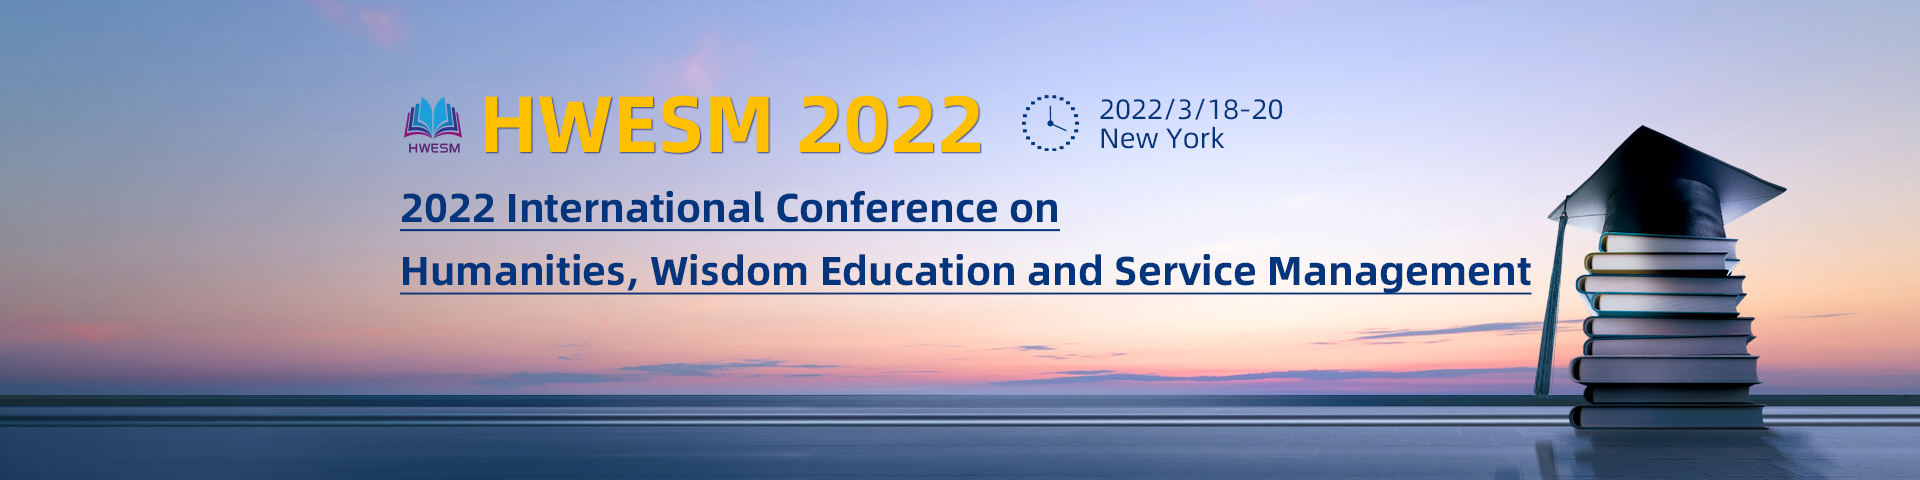 2022 International Conference on Humanities, Wisdom Education and Service Management（HWESM 2022）, Online Event